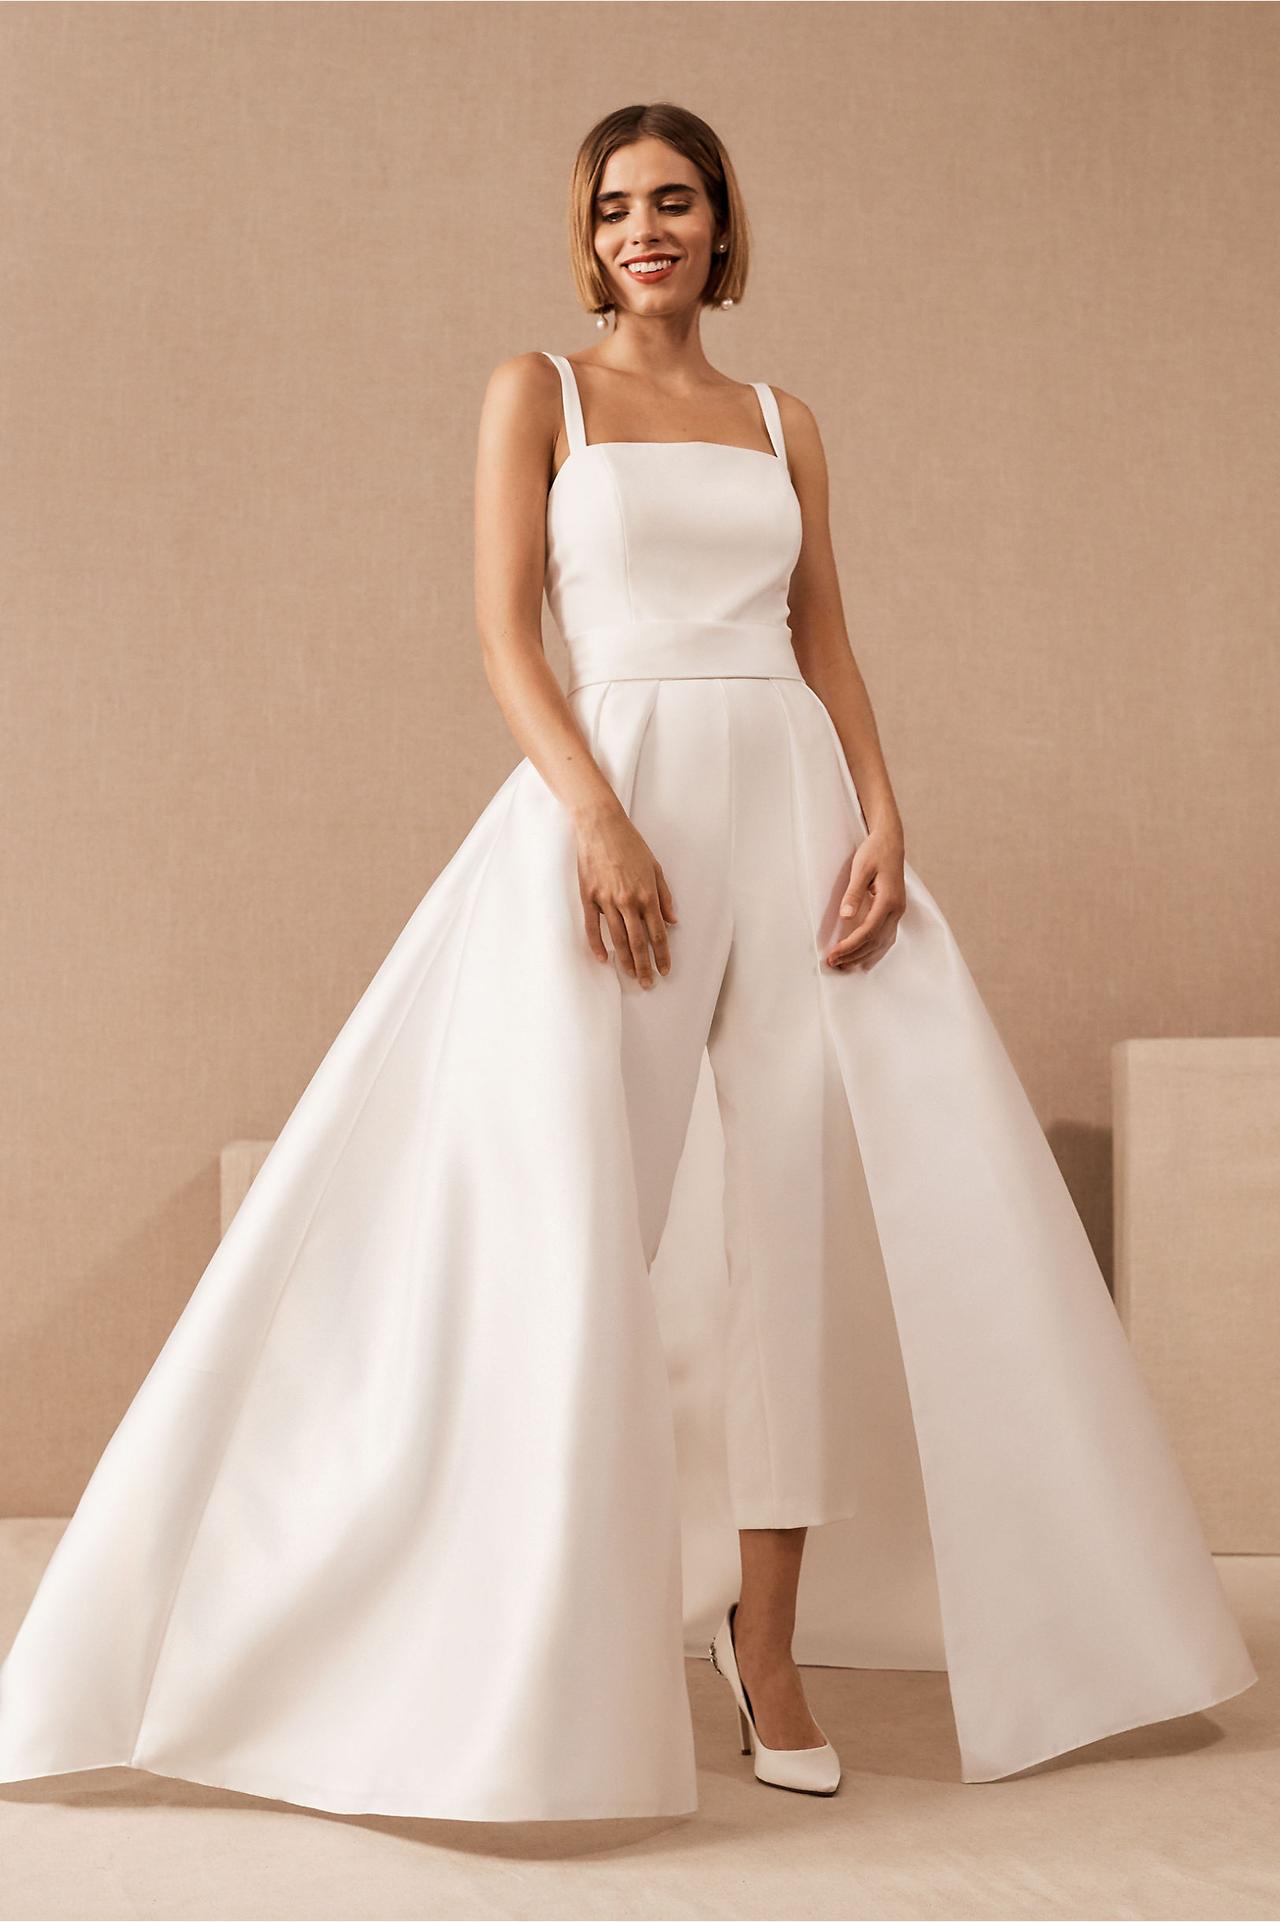 Real Brides Who Nailed the Bridal Jumpsuit Look